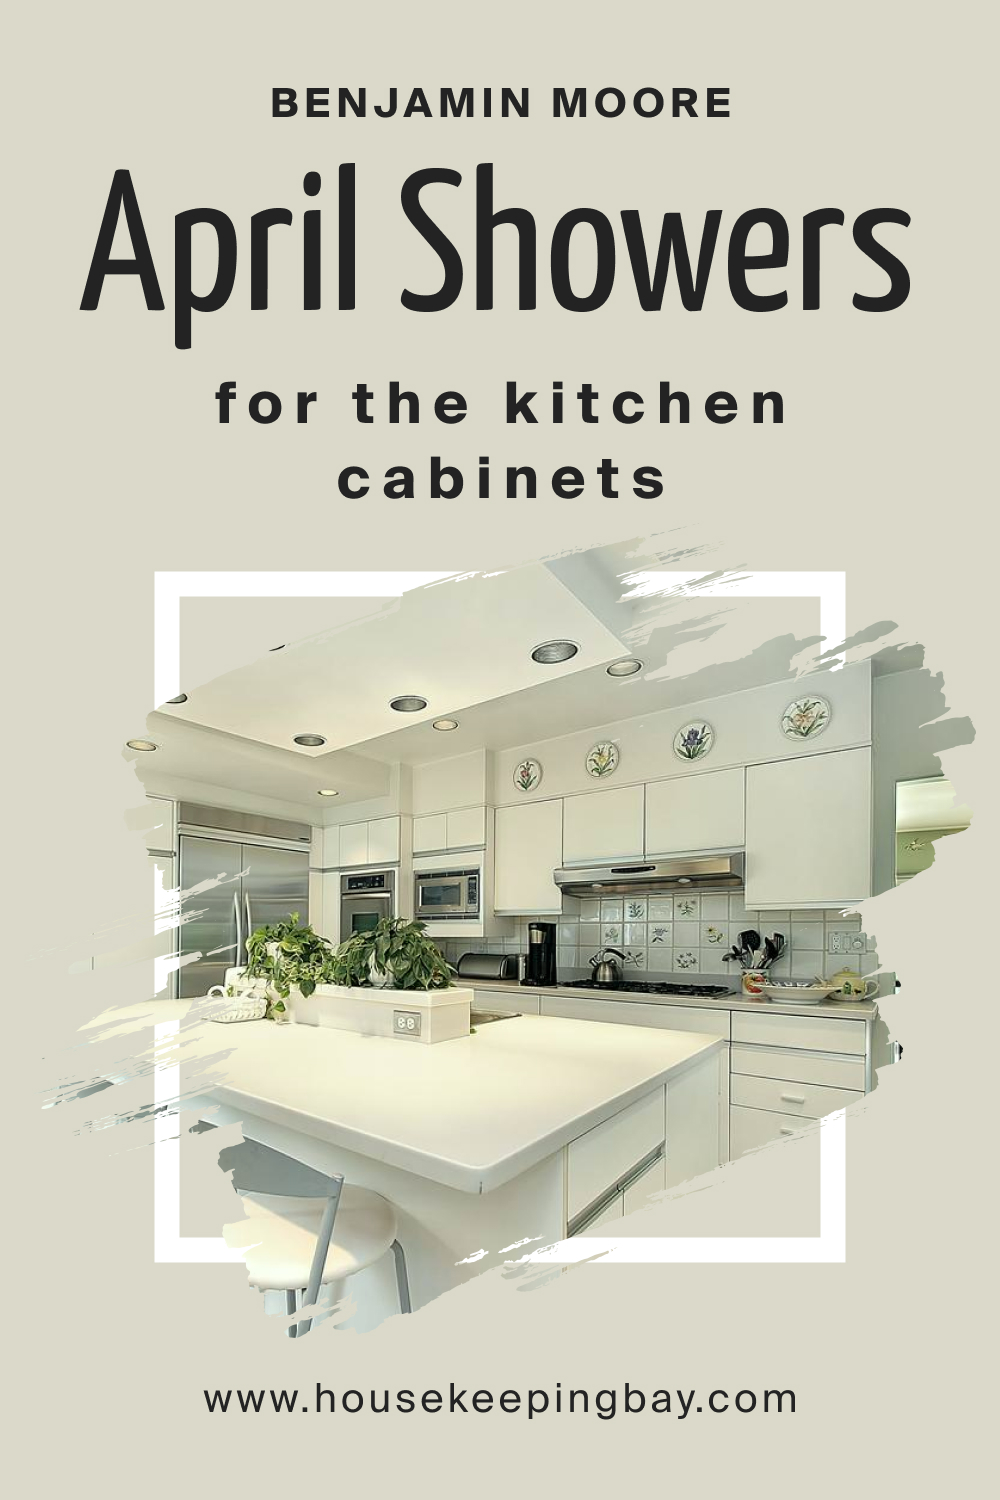 How to Use BM April Showers 1507 on Kitchen Cabinets?